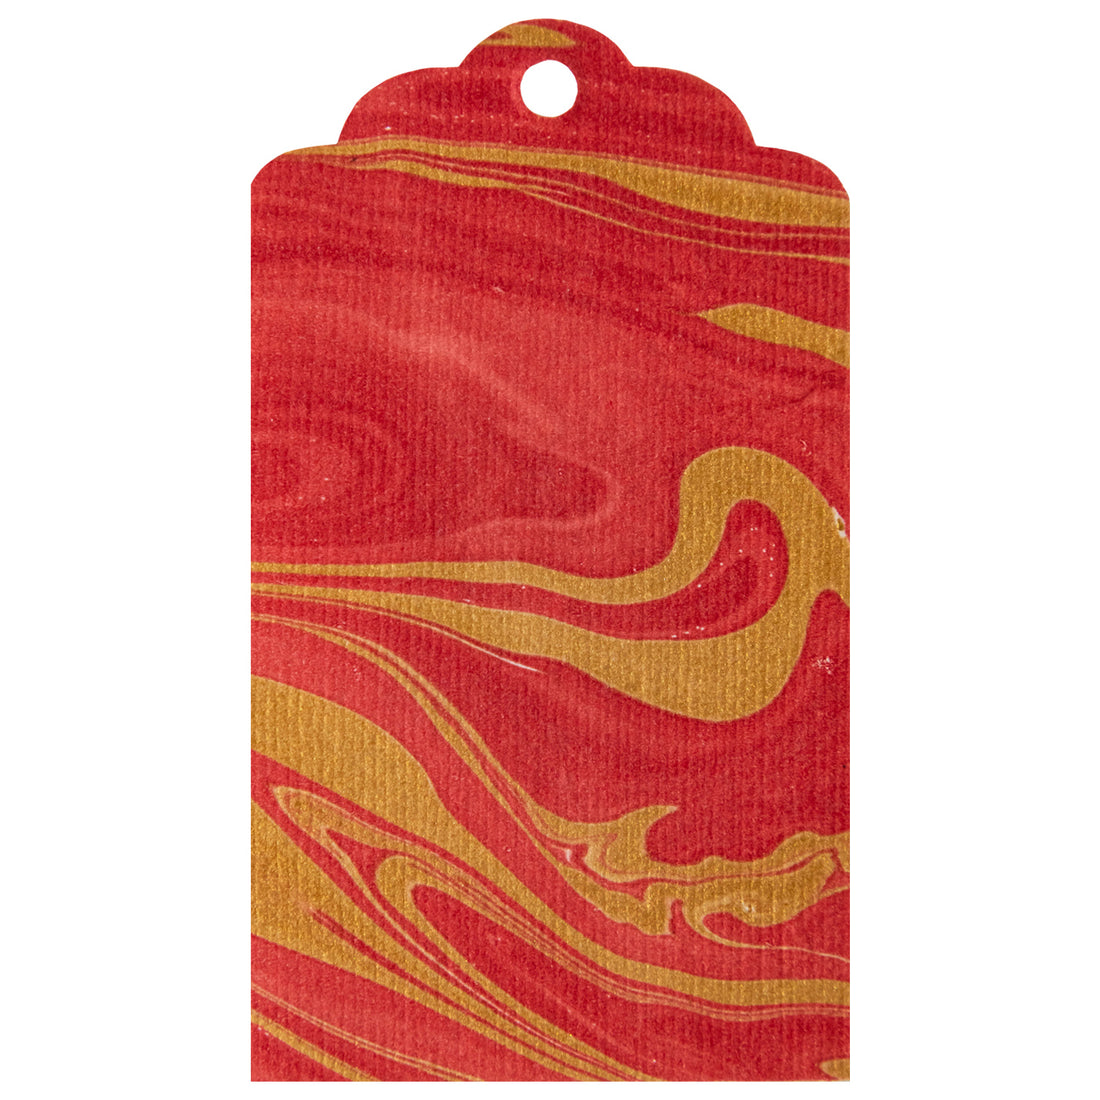 A unique Vein Marbled gift tag made of handmade paper by Hester &amp; Cook.